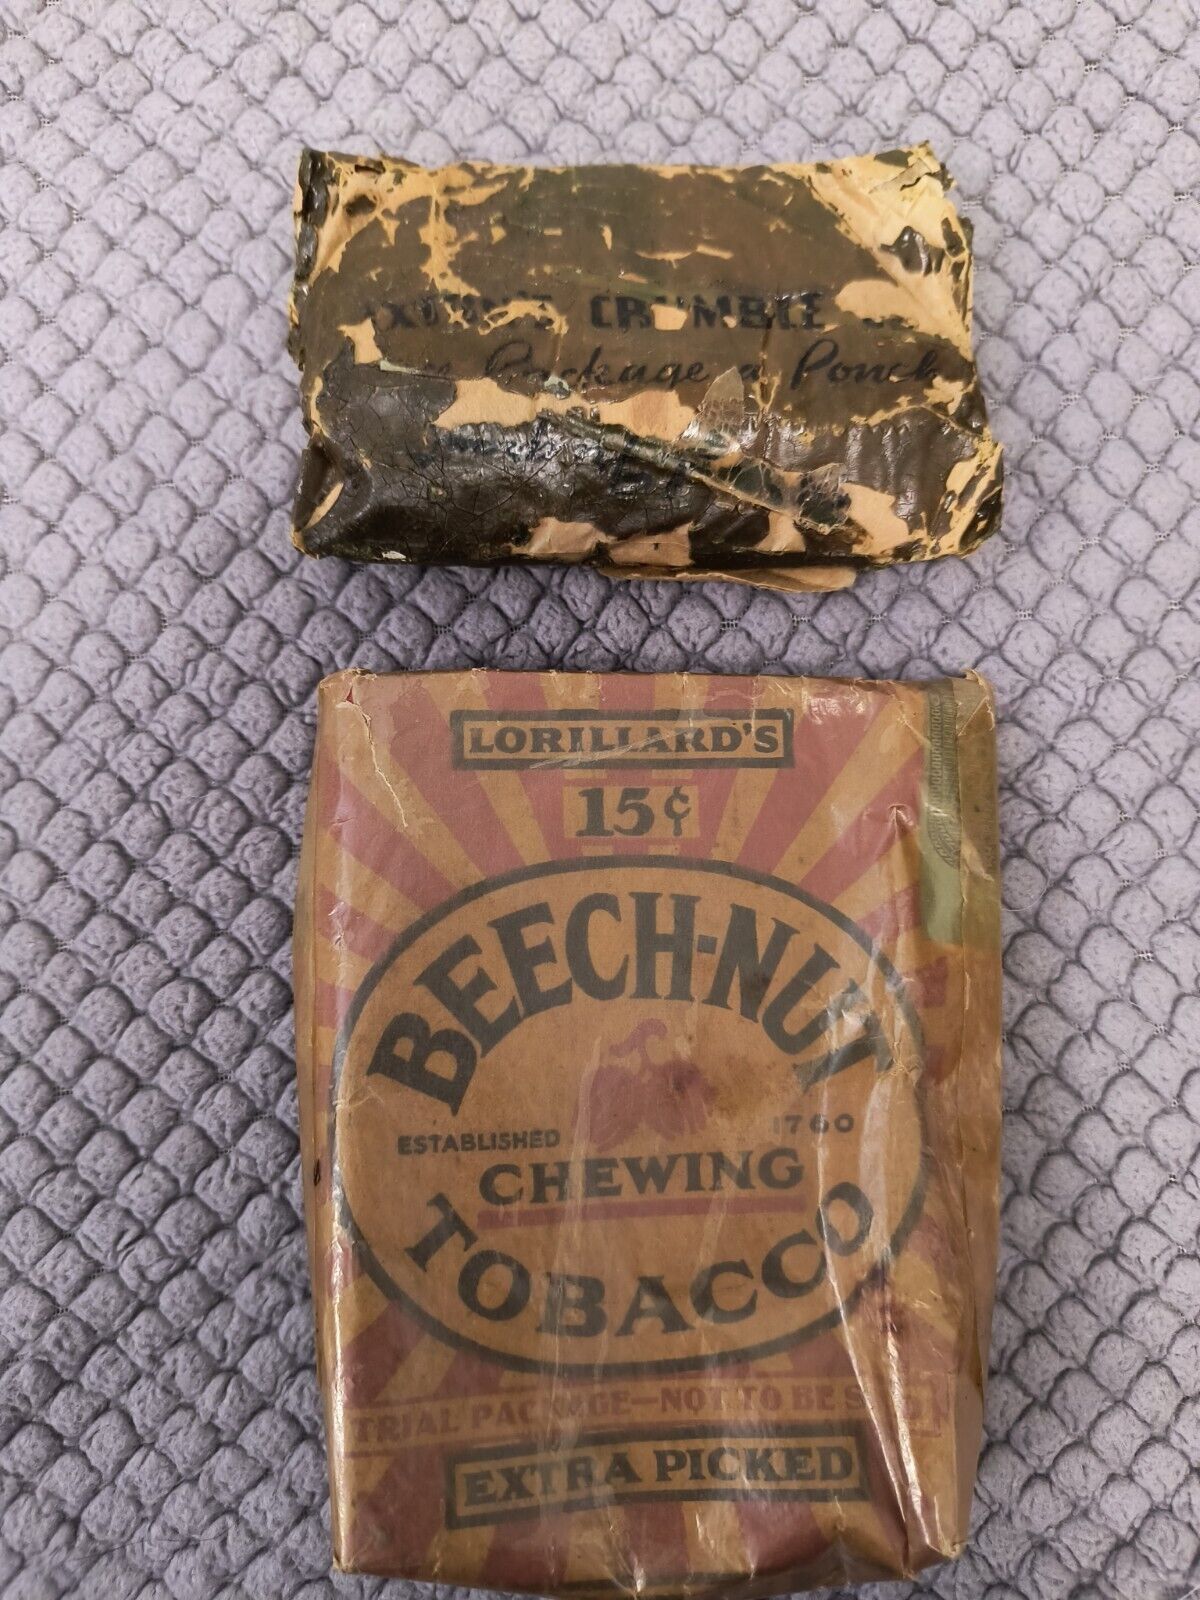 Beech Nut Tobacco Vintage Package And Sextons Crumble Both Super Old - Chew